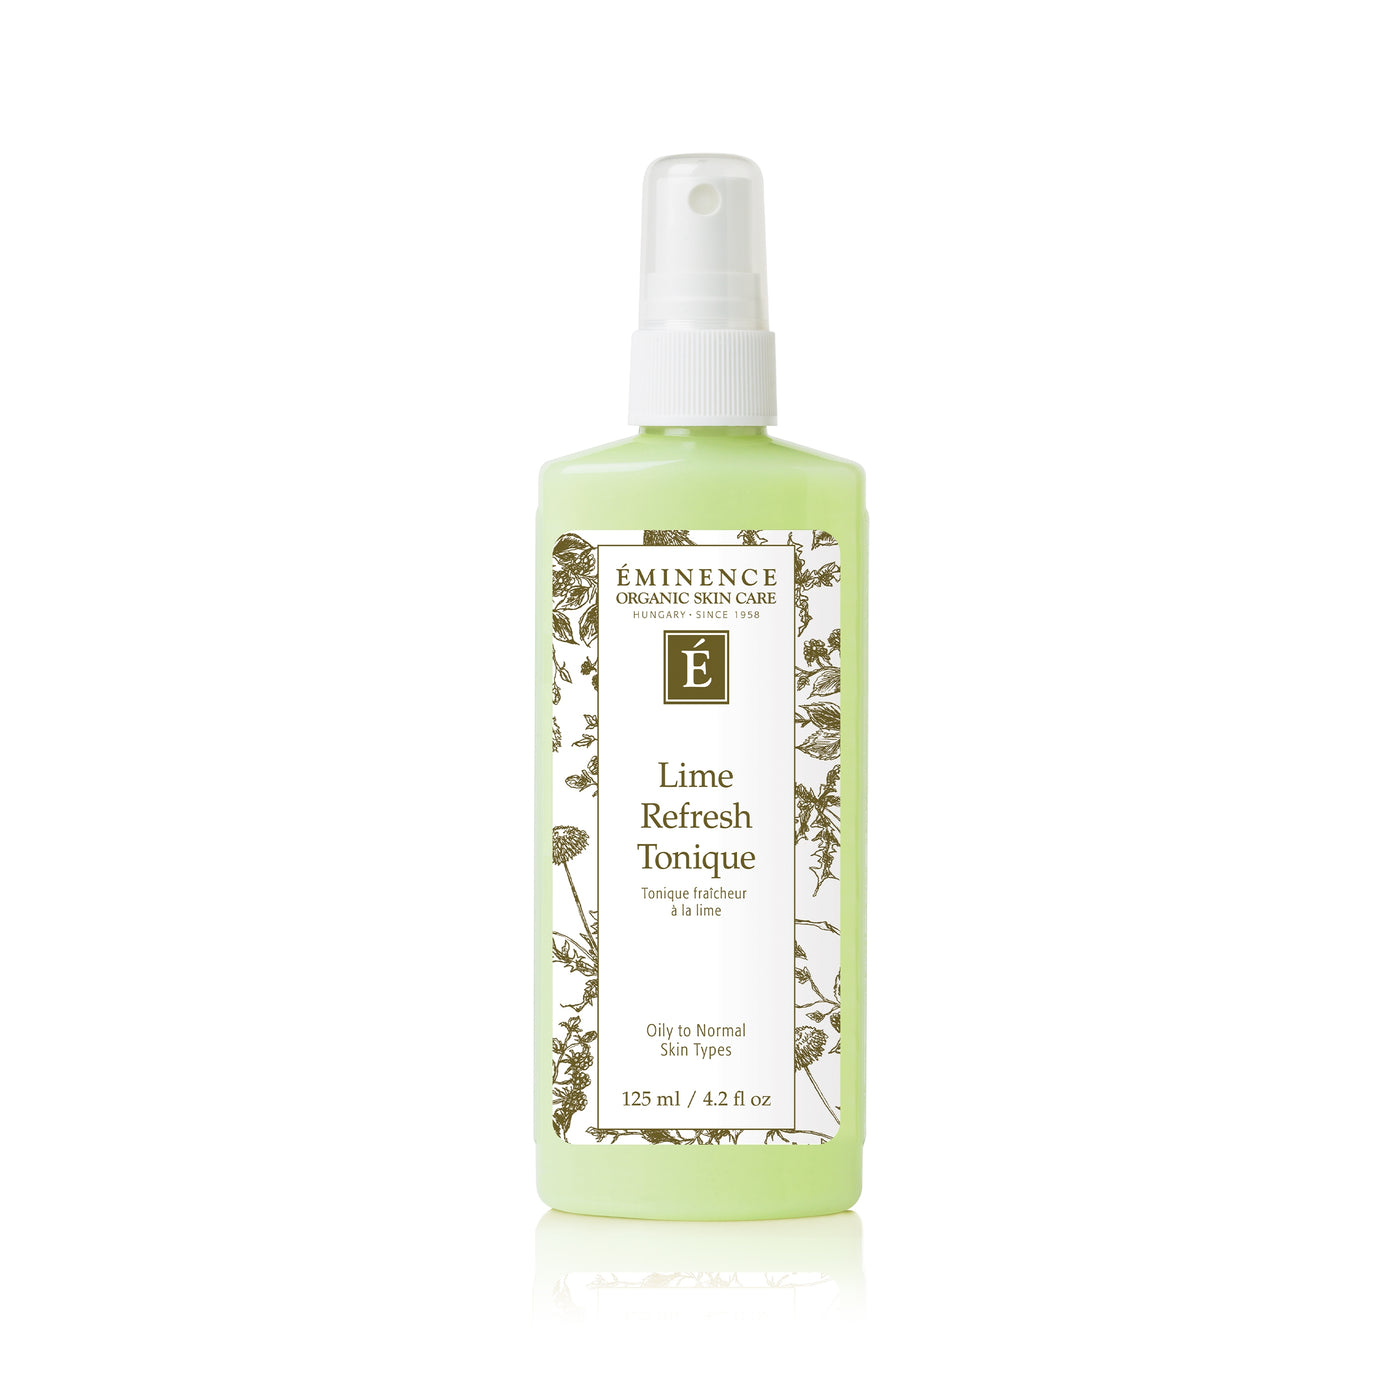 Eminence Organics Lime Refresh Tonique - Radiance Clean Beauty